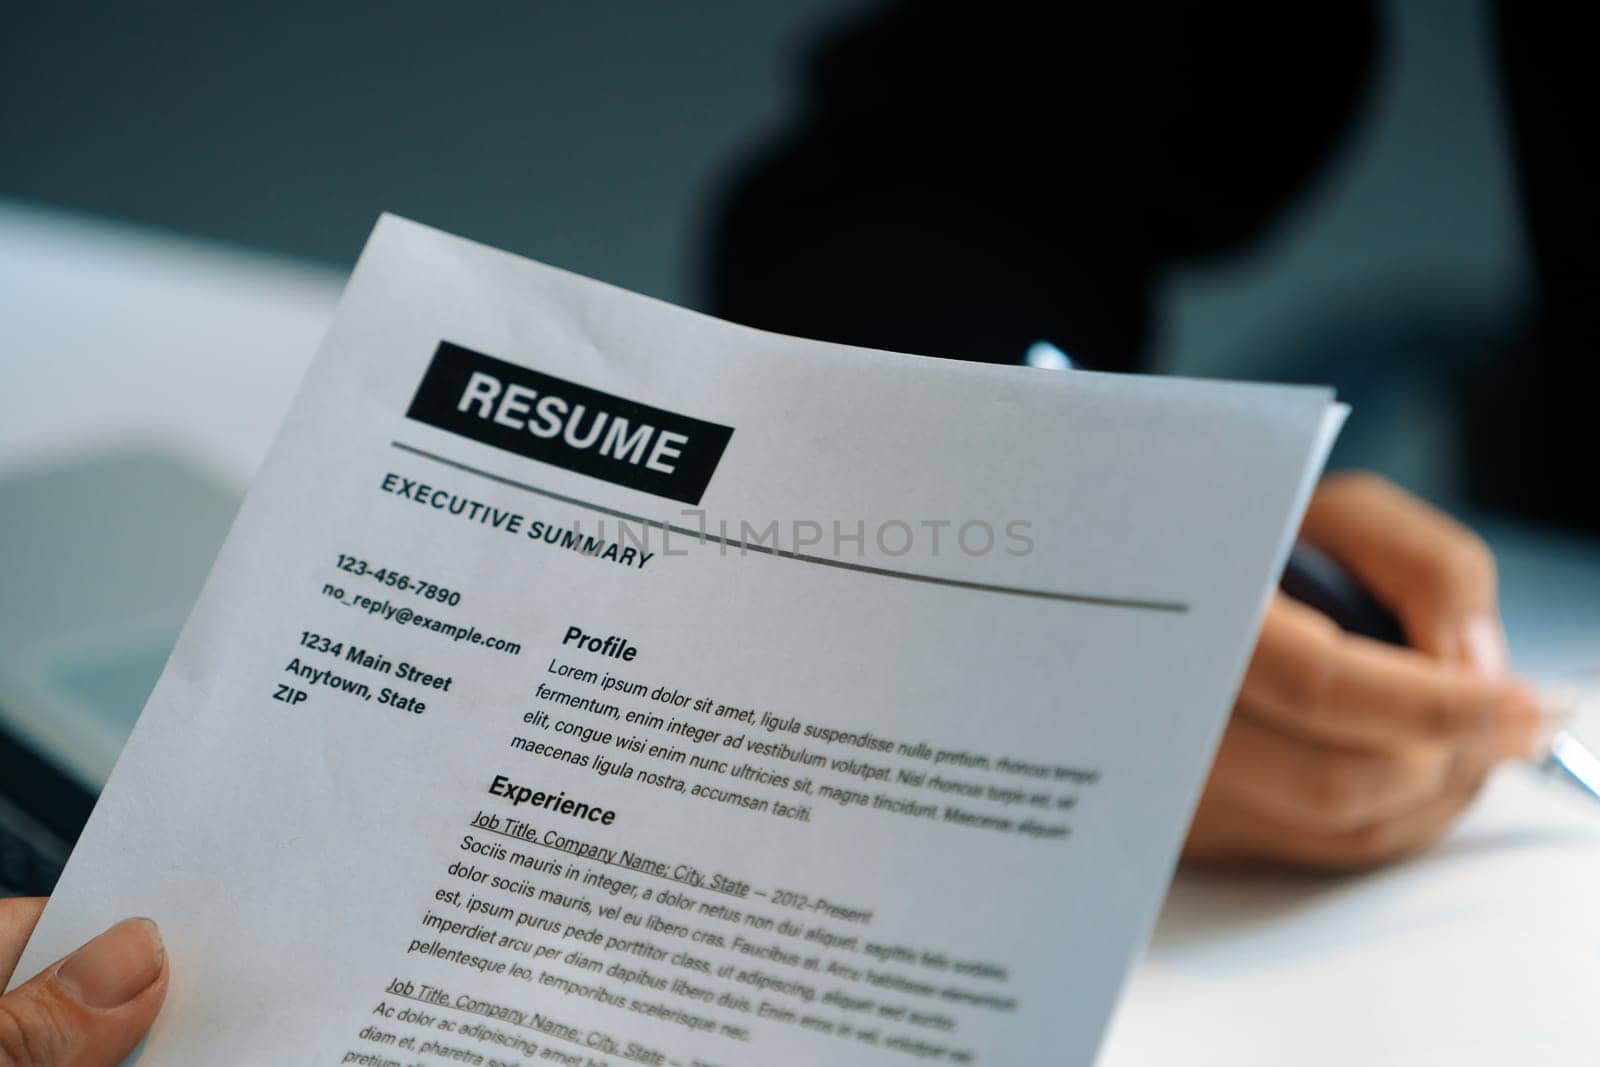 Human resources department manager reads CV resume uds by biancoblue